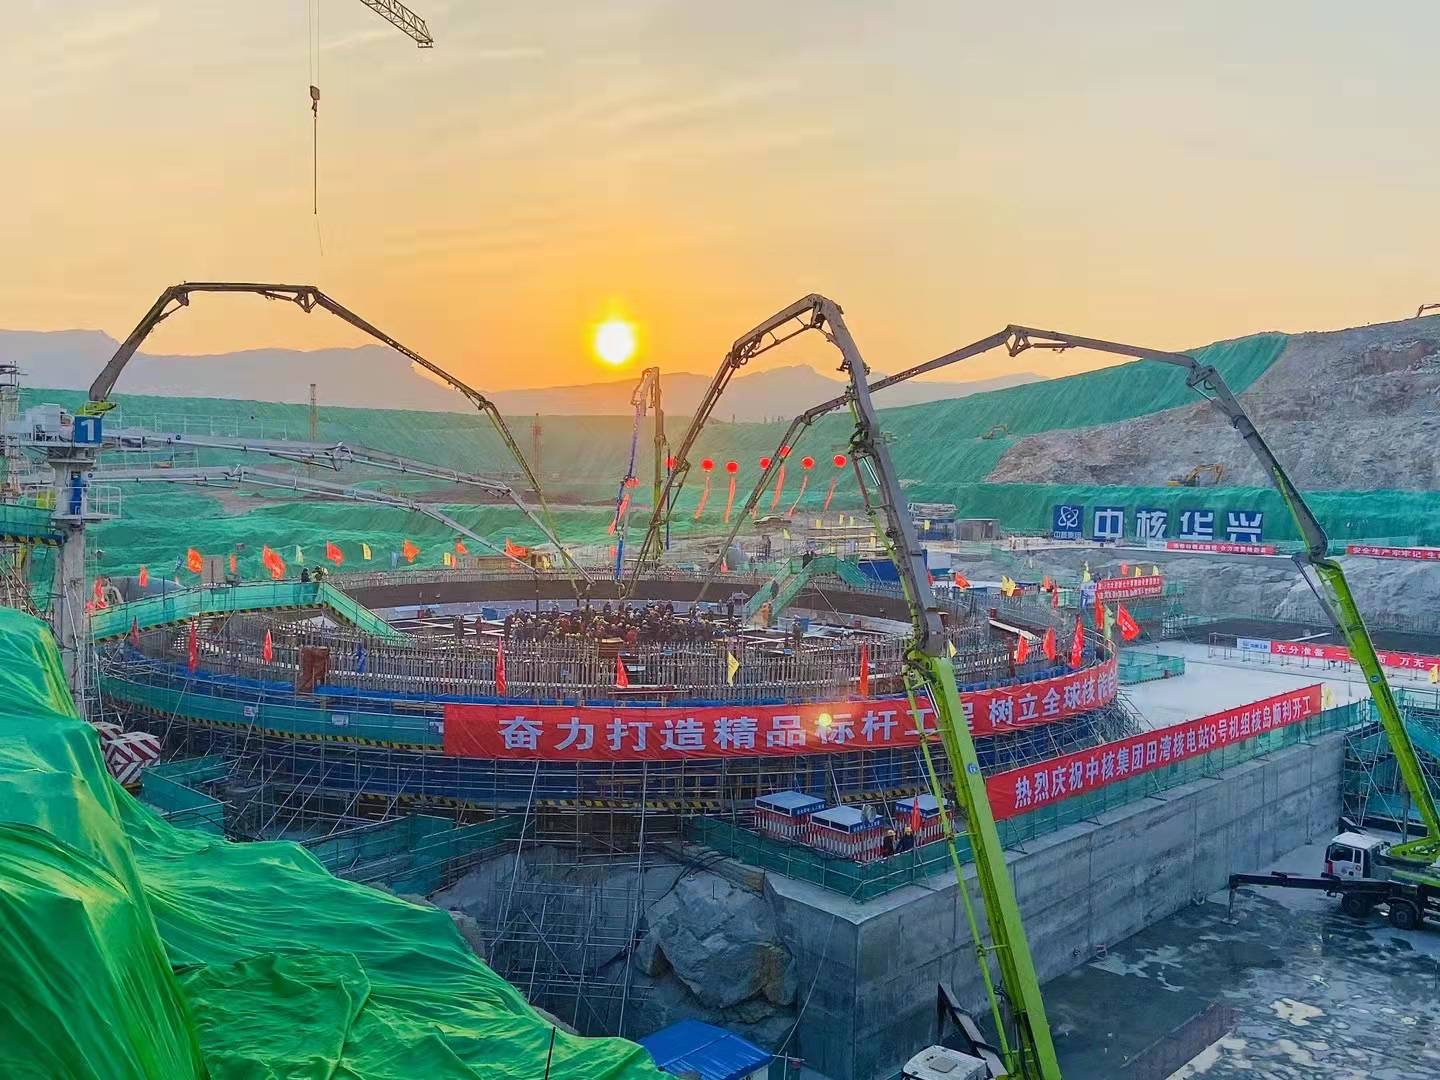 The First Concrete has been Laid at Tianwan NPP Power Unit 8 in China